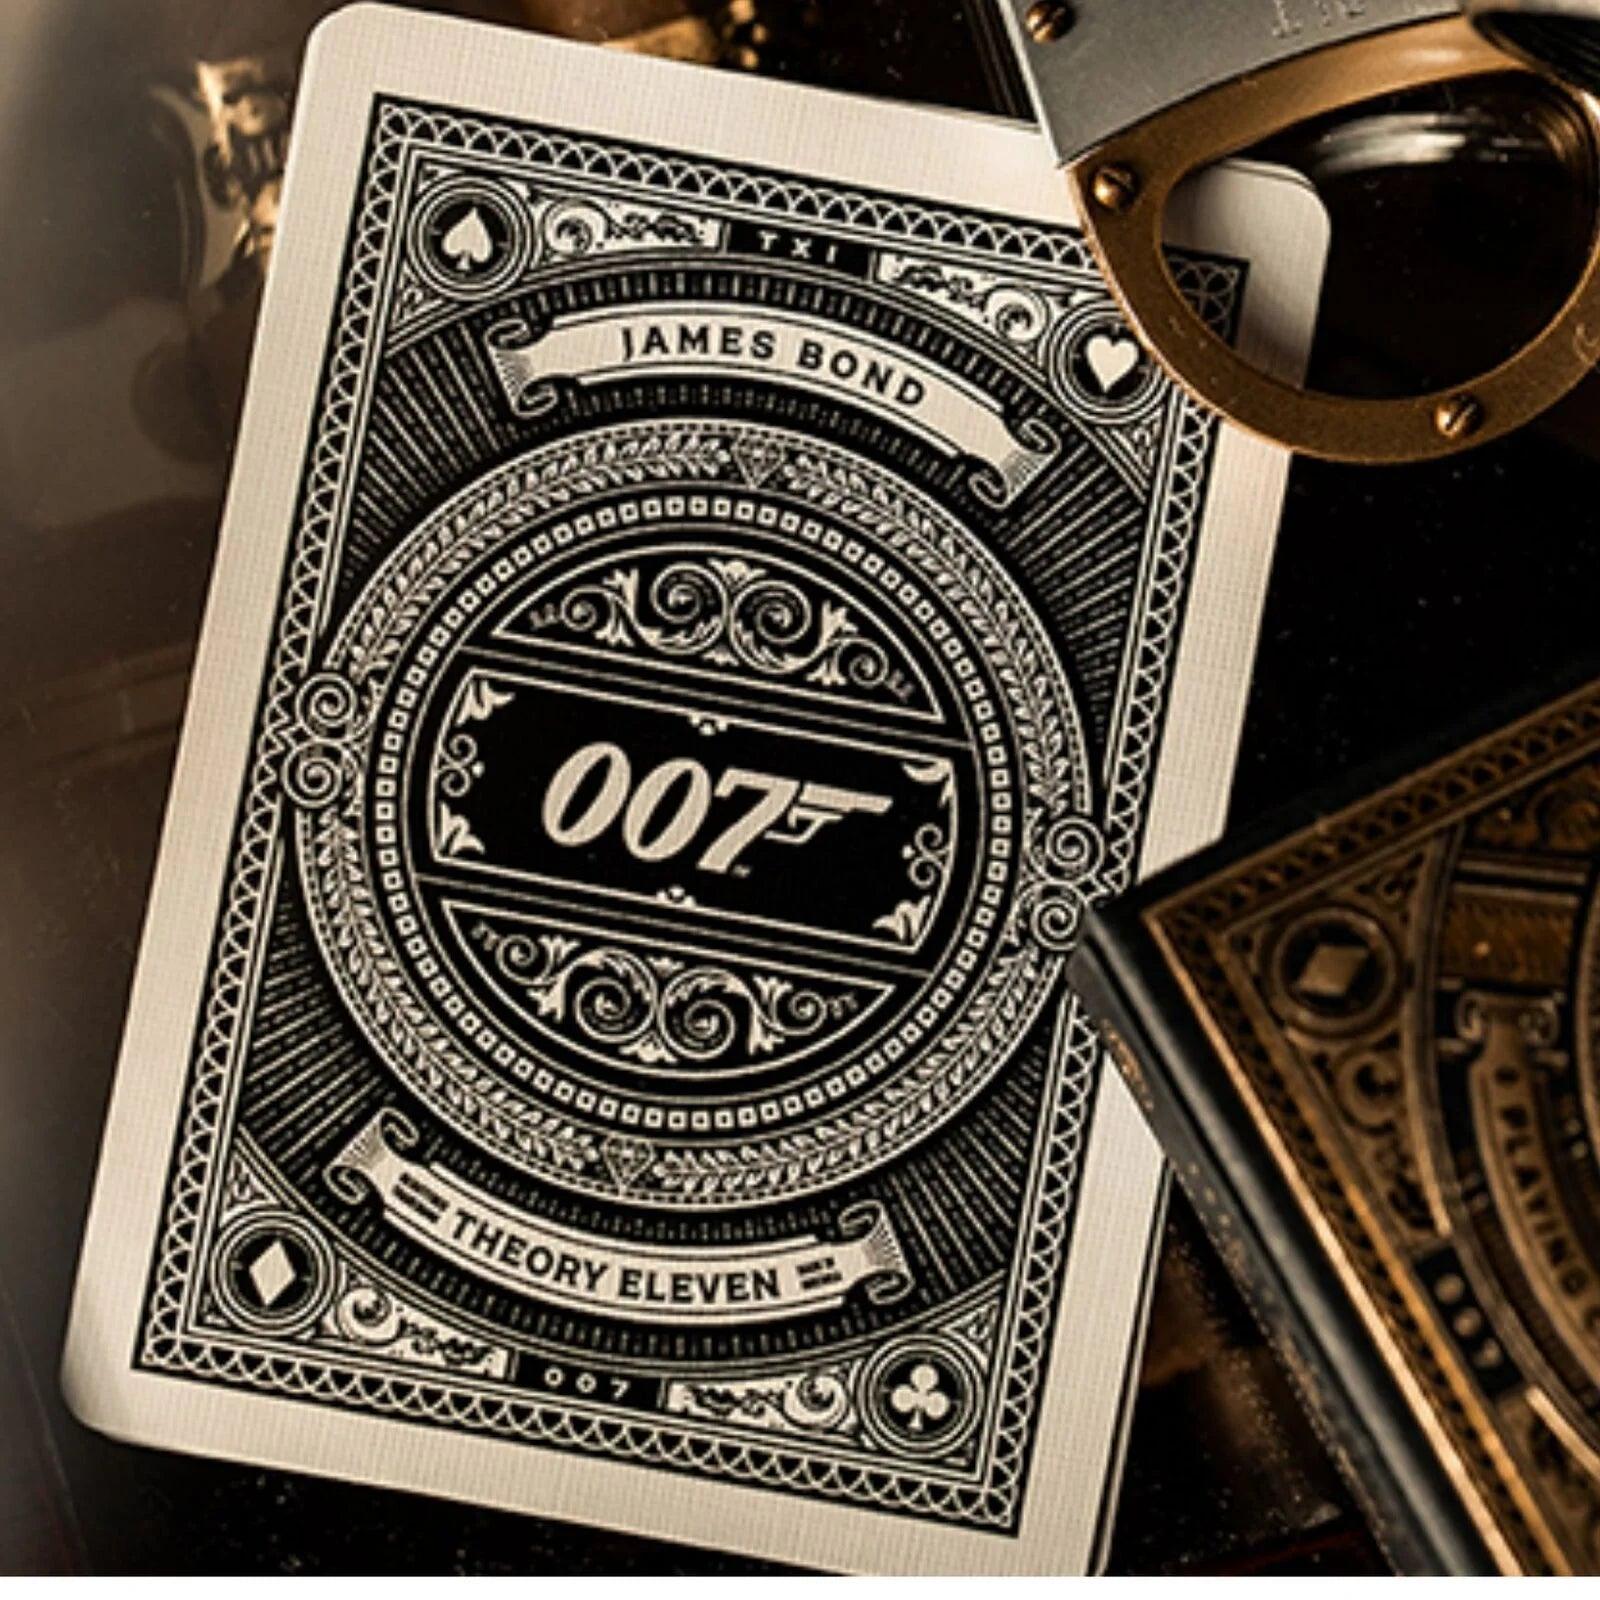 James Bond 007 Theory11 Playing Cards - Eclipse Games Puzzles Novelties